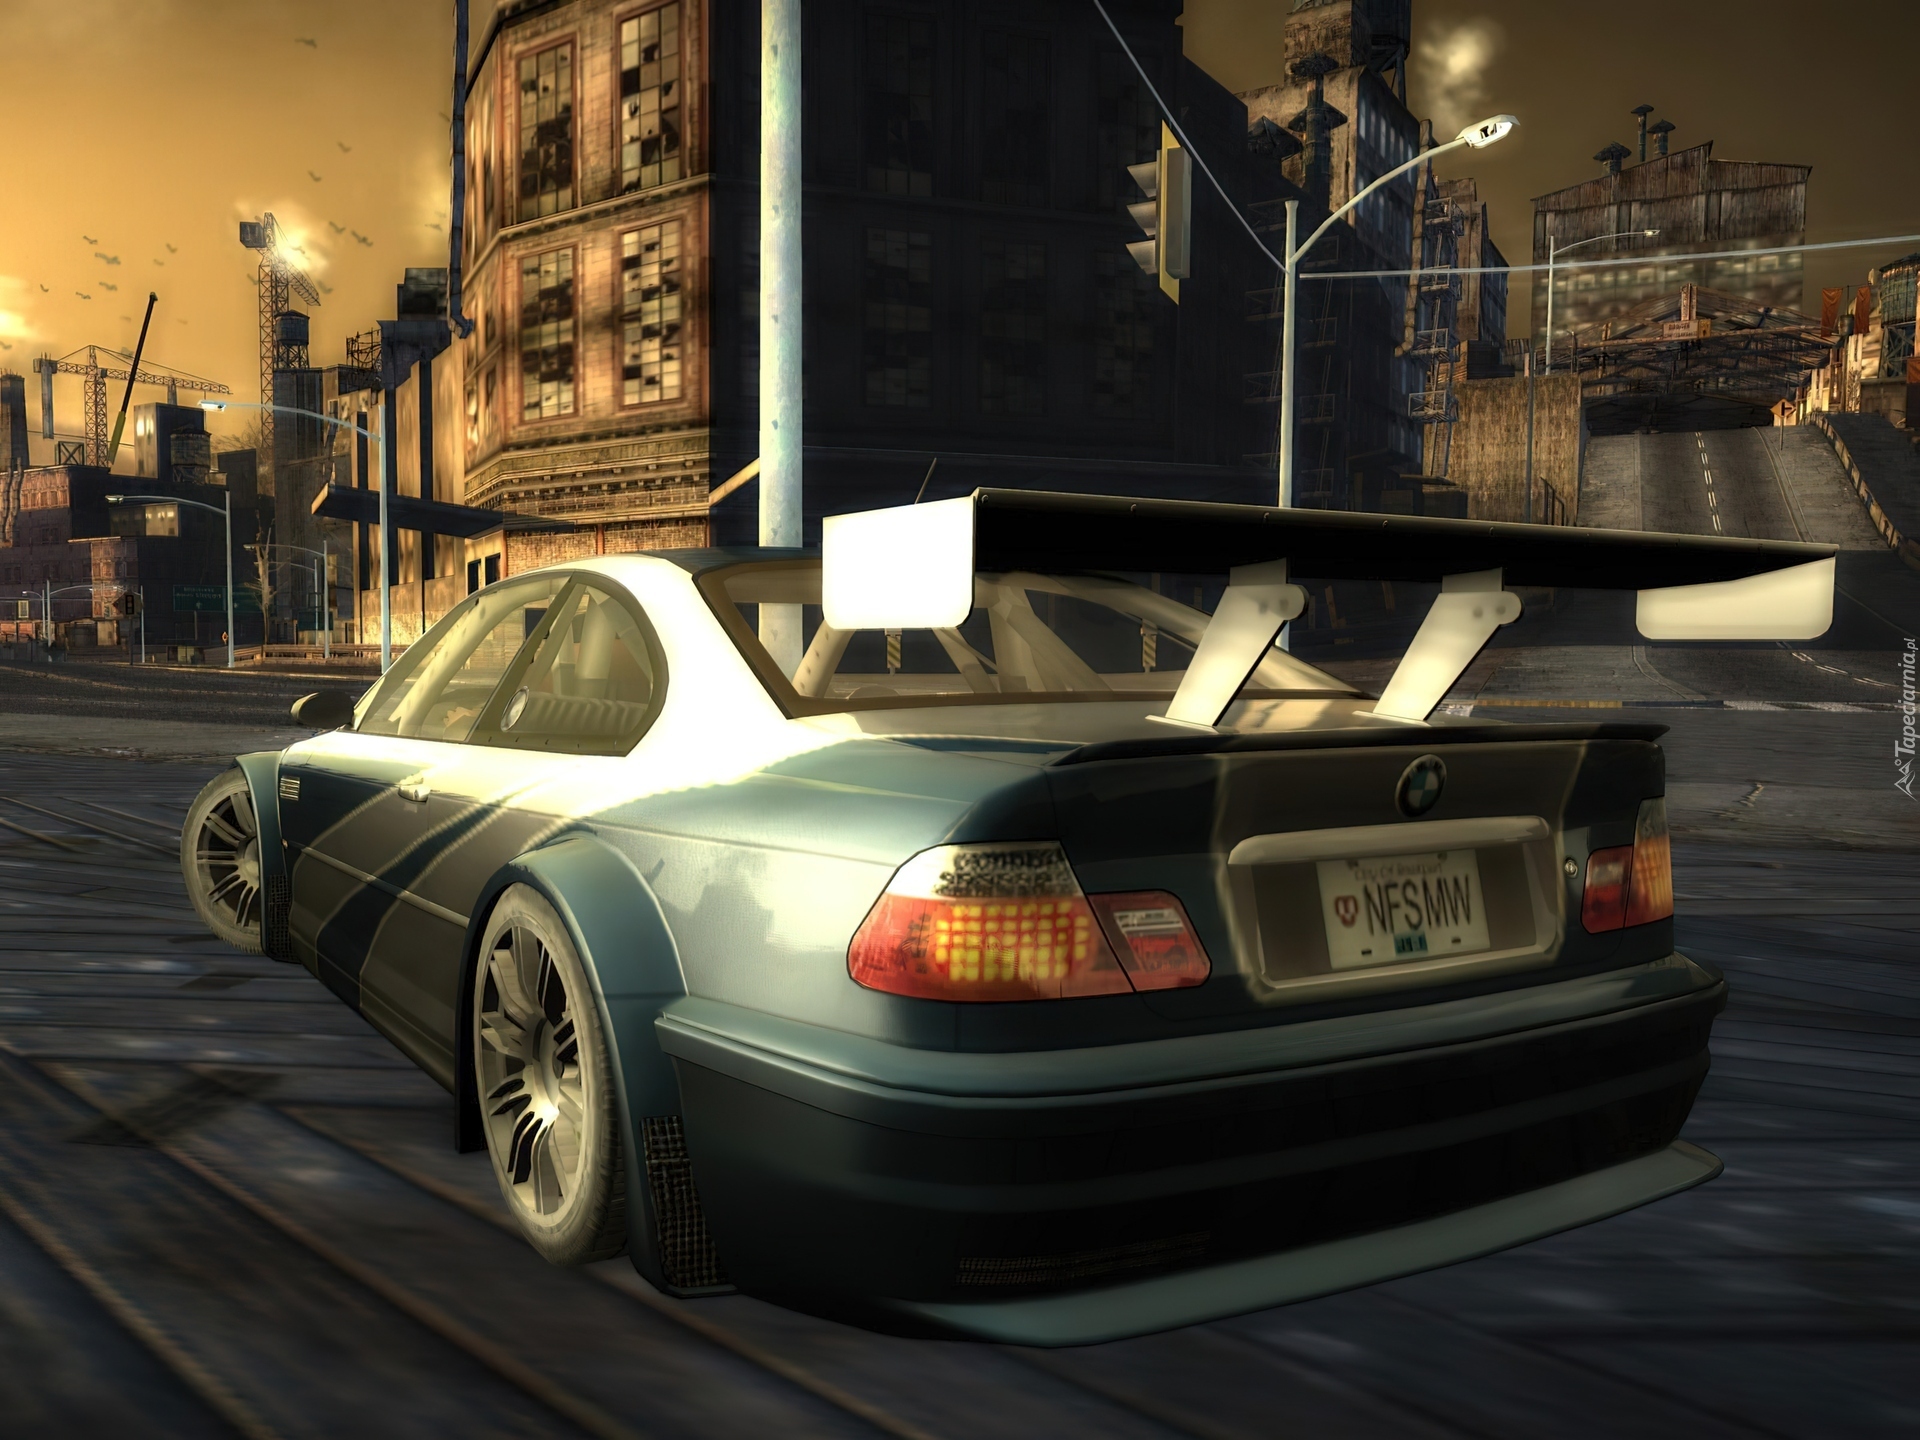 Nfs assemble. Most wanted 2005 Black Edition машины. BMW m3 GTR NFS MW. Гонки NFS most wanted. Need for Speed most wanted 2005.